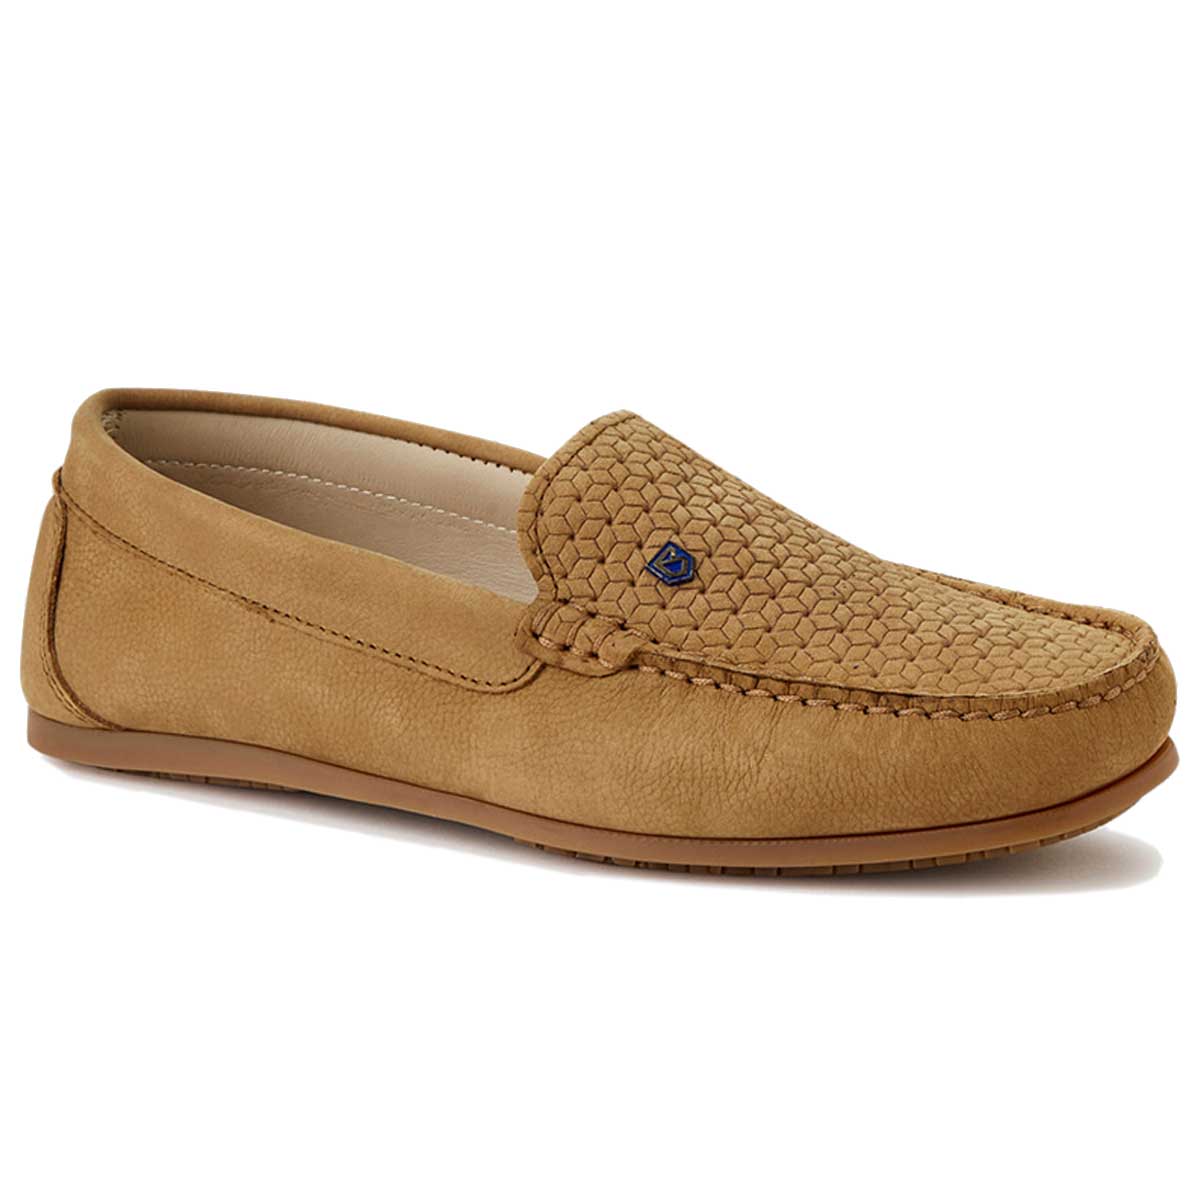 40% OFF - DUBARRY Ladies Cannes Loafer - Tan - Size: 6.5 (EU 40)